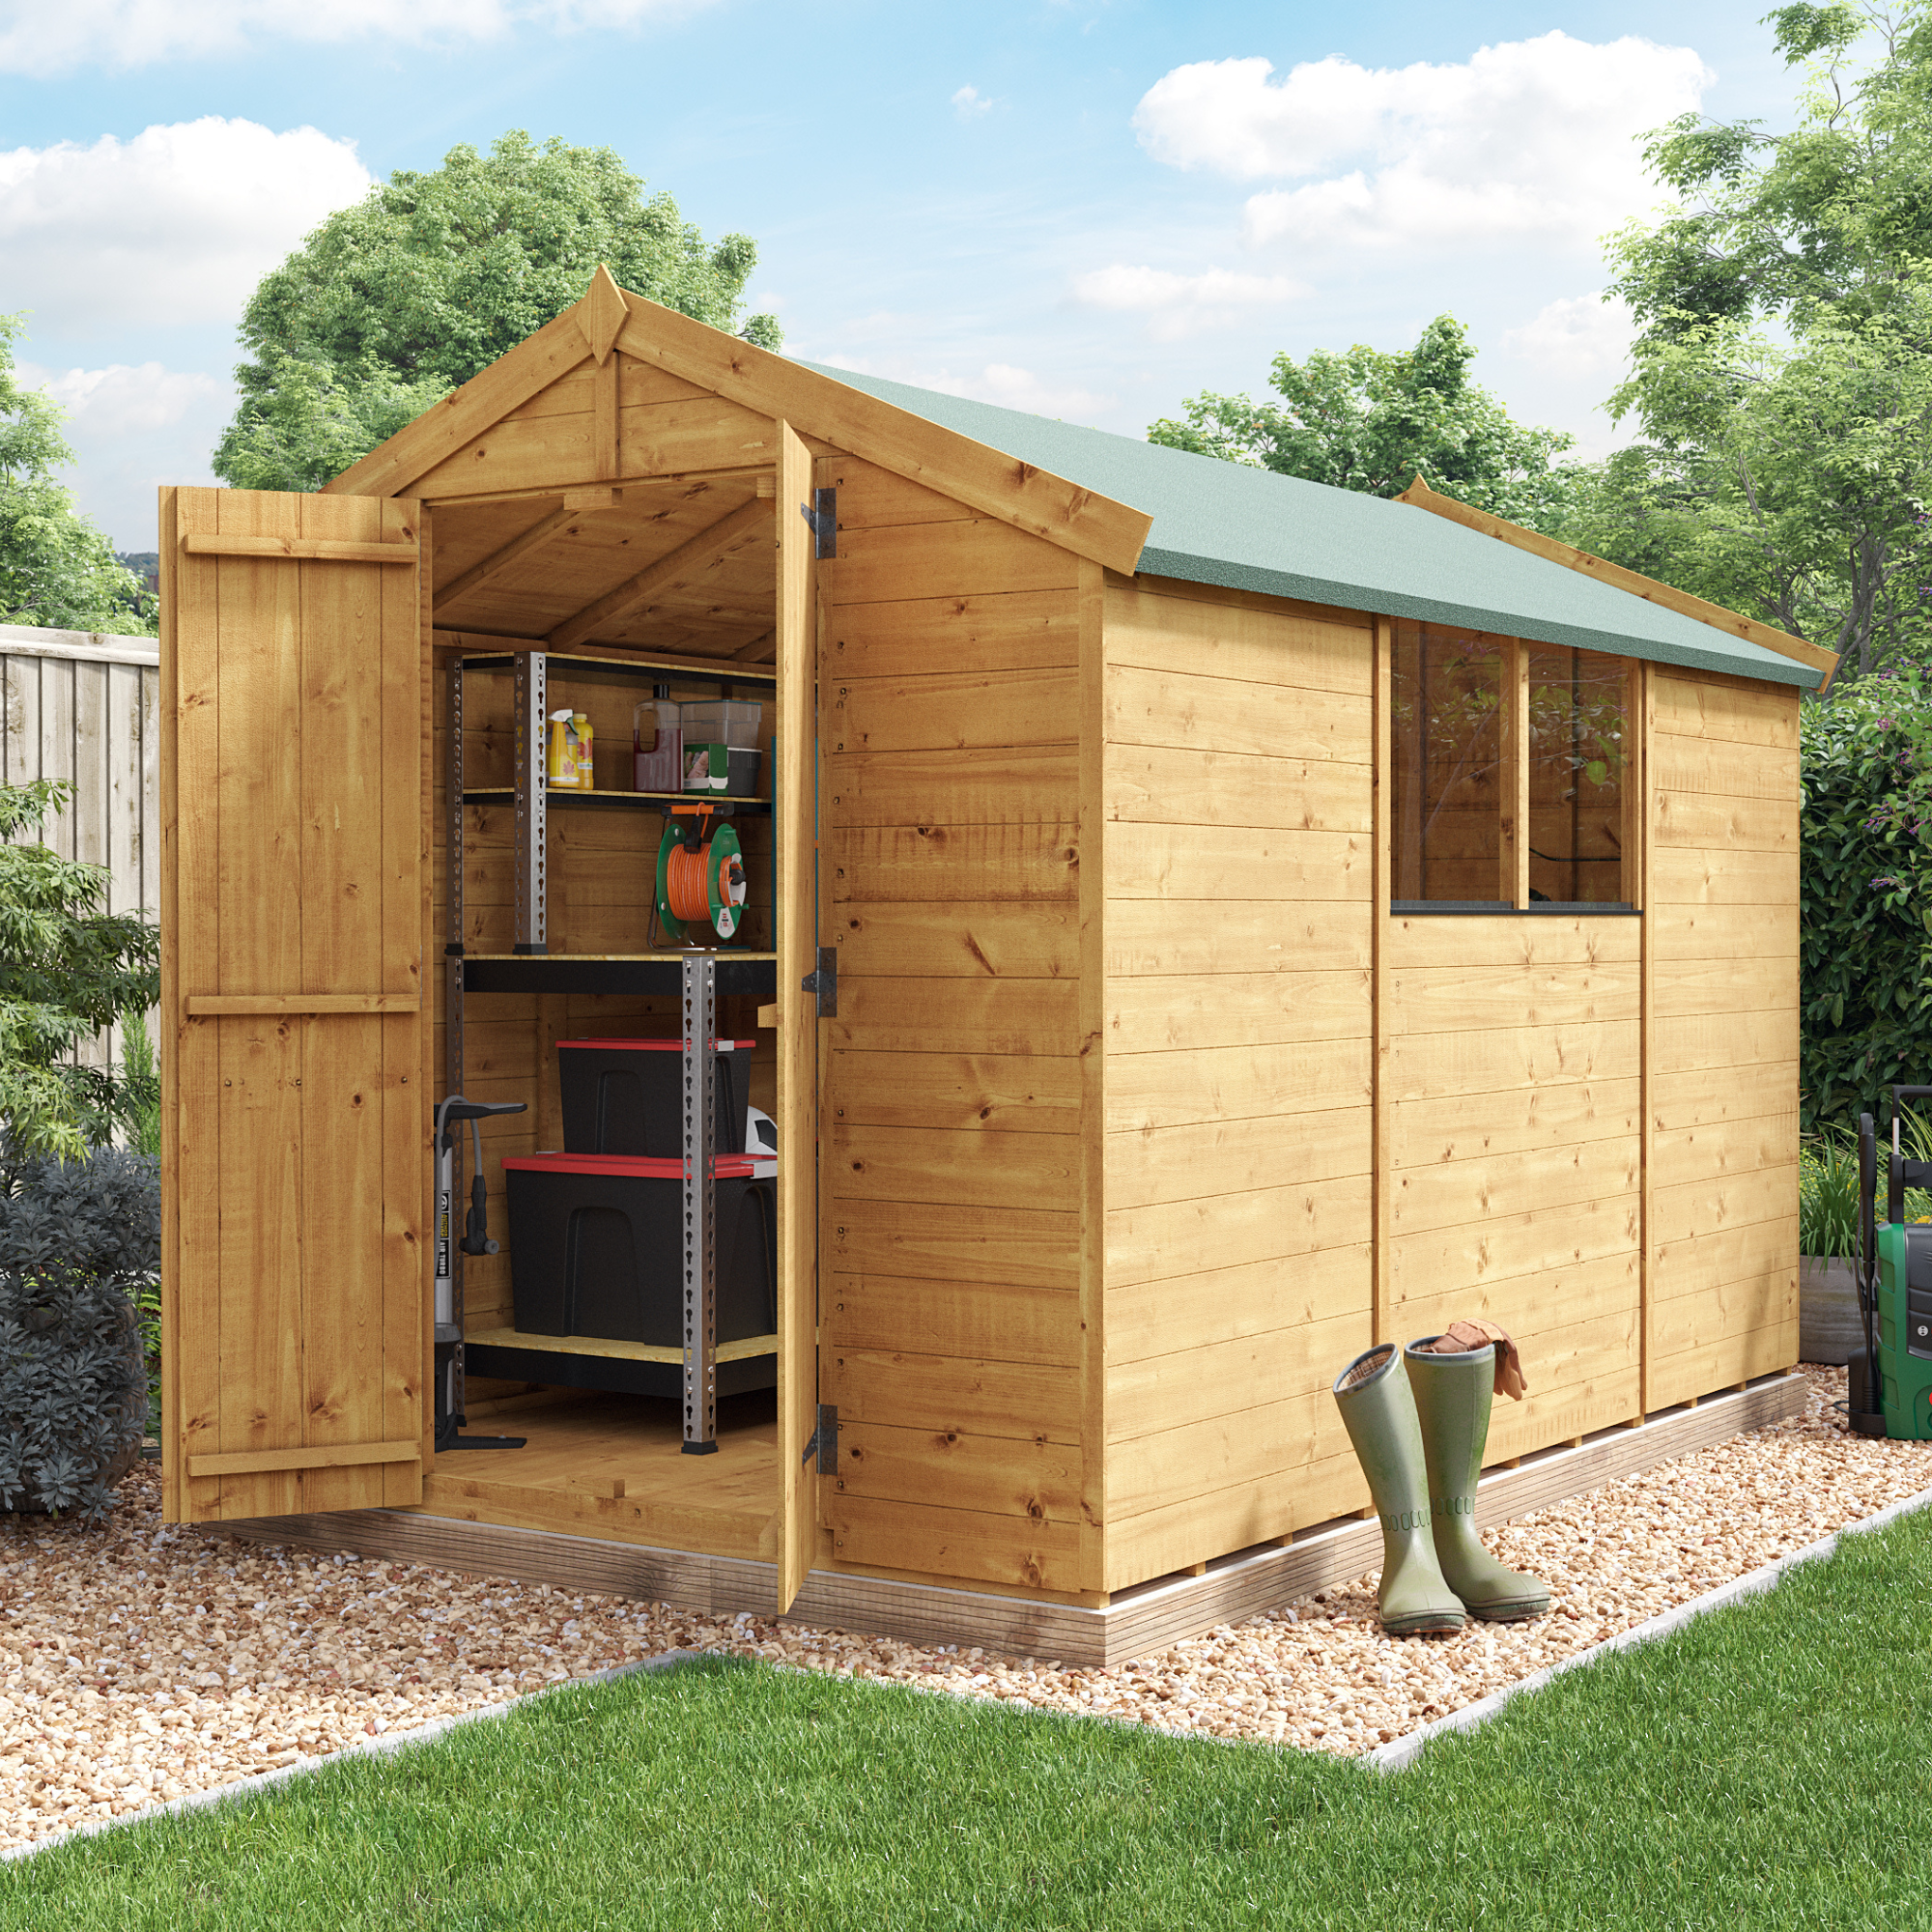 Image of 10 x 6 Shed - BillyOh Keeper Overlap Apex Wooden Shed - Windowed 10x6 Garden Shed